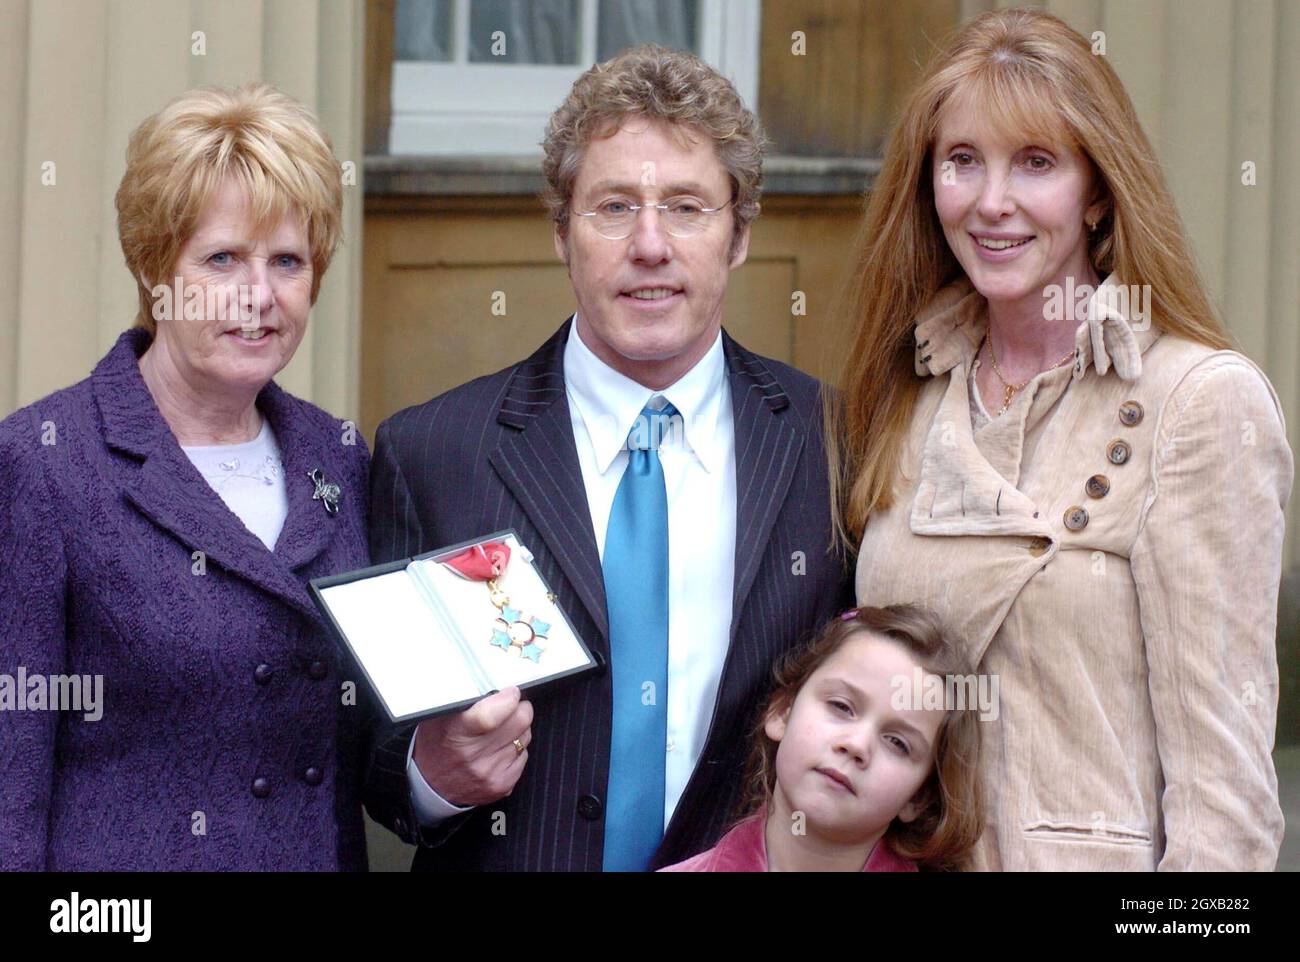 Roger Daltrey from the The Who poses with his wife Heather (right), sister Jill Dale (left) and grand-daughter Lily, 6,  in the courtyard of Buckingham Palace in central London, Wednesday February 9, 2005. The singer had just been honoured as a Commander of the British Empire (CBE) for services to music. Anwar Hussein/allactiondigital.com   Stock Photo